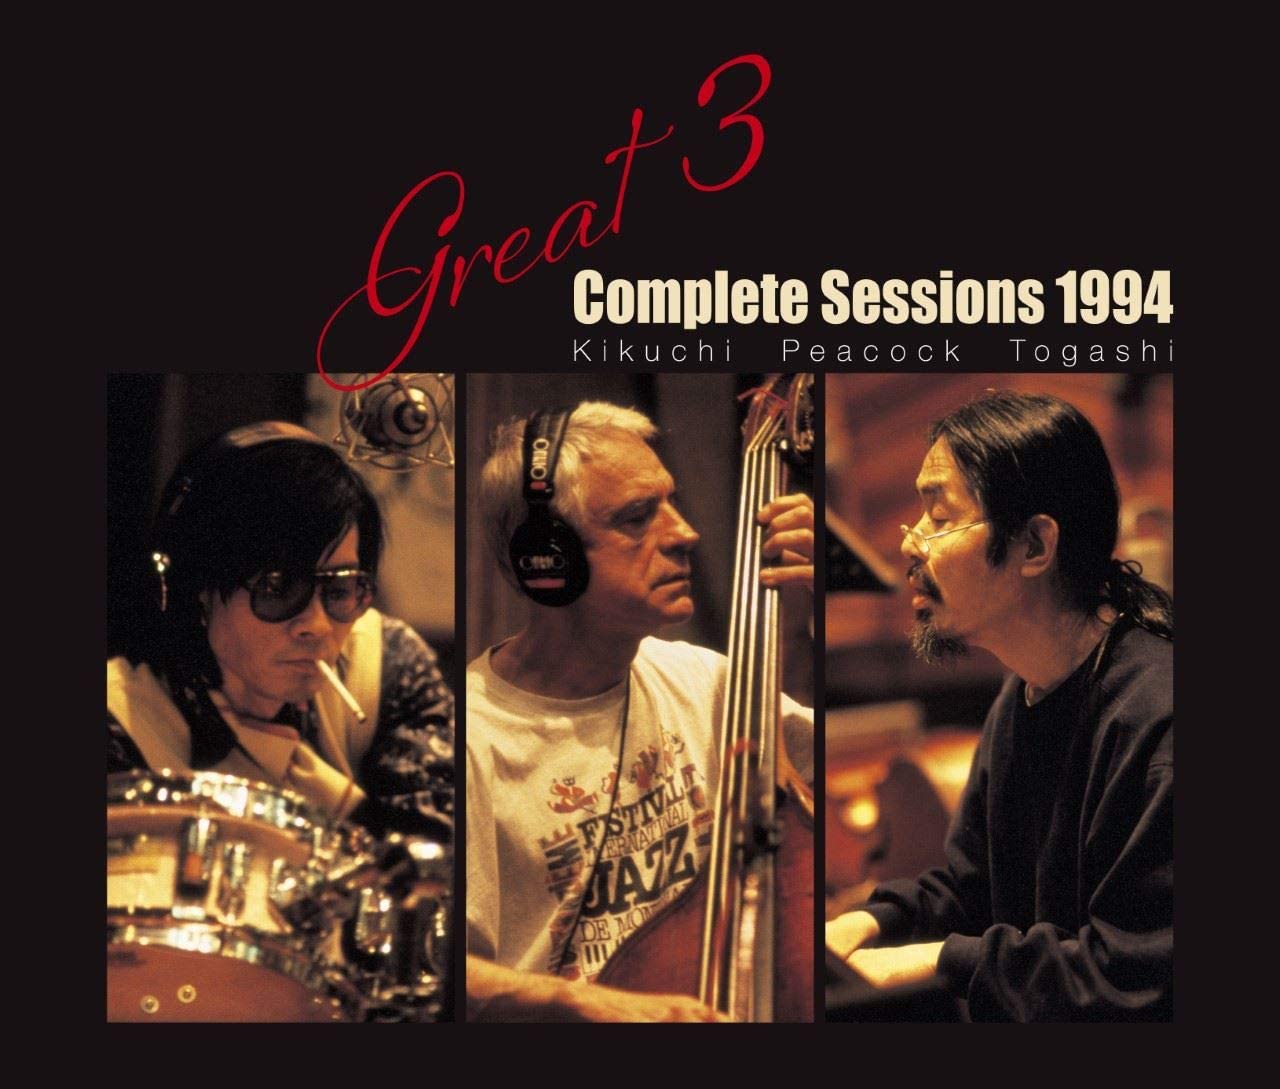 Great 3 / Complete Sessions 1994